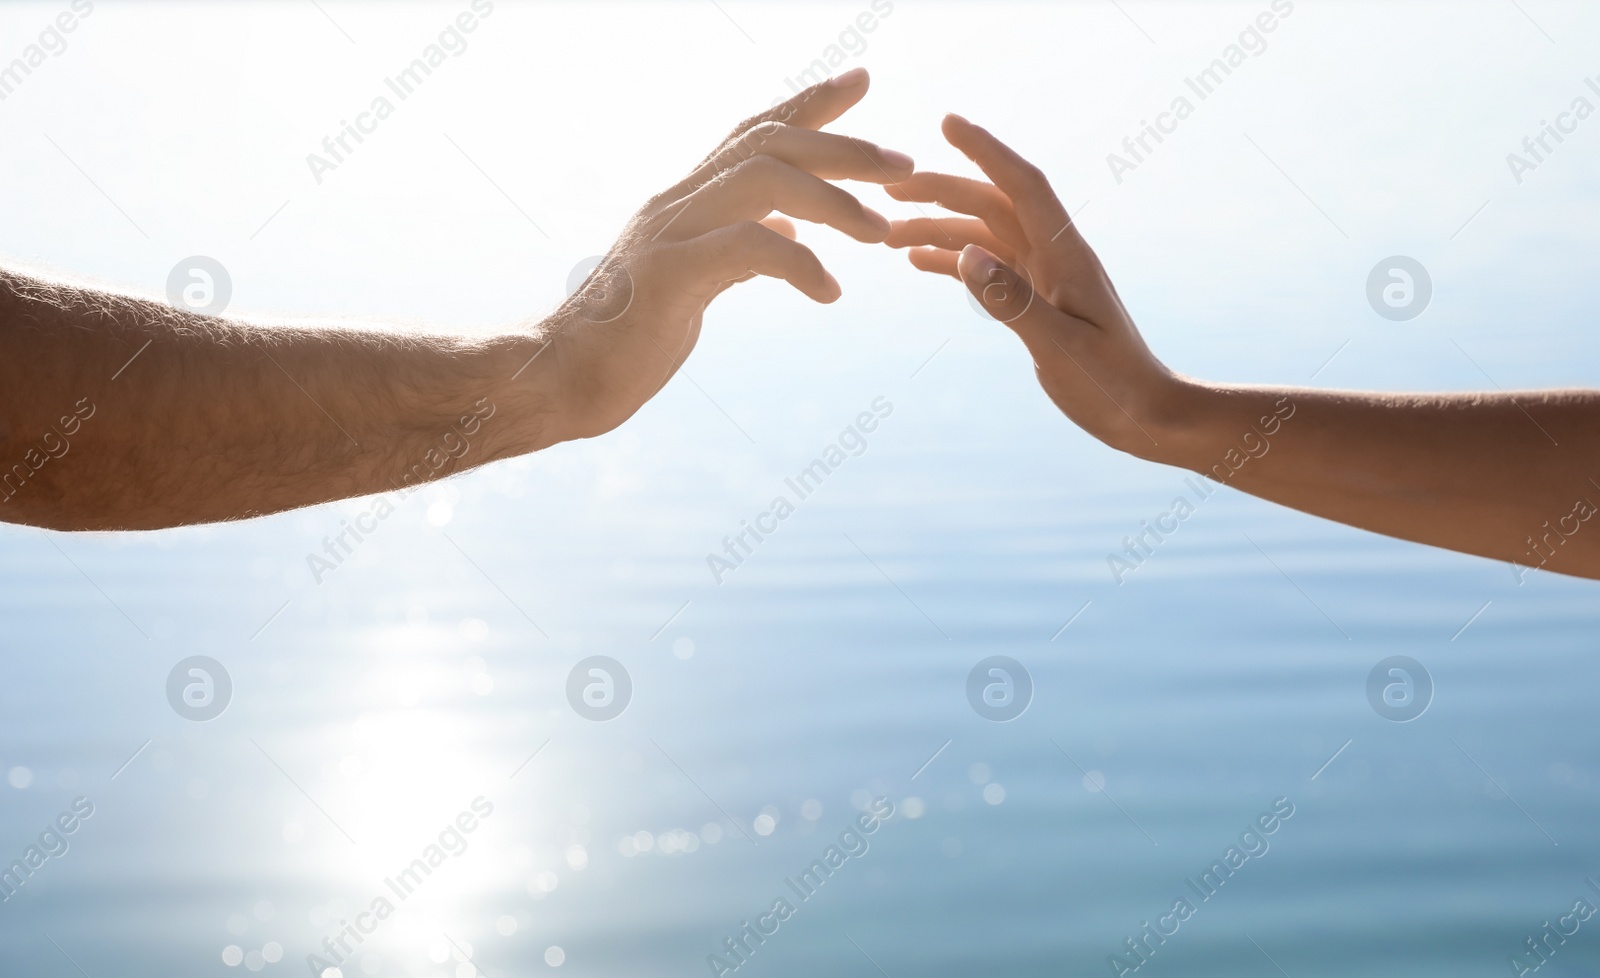 Photo of Man and woman reaching hands to each other at sunset, closeup. Nature healing power